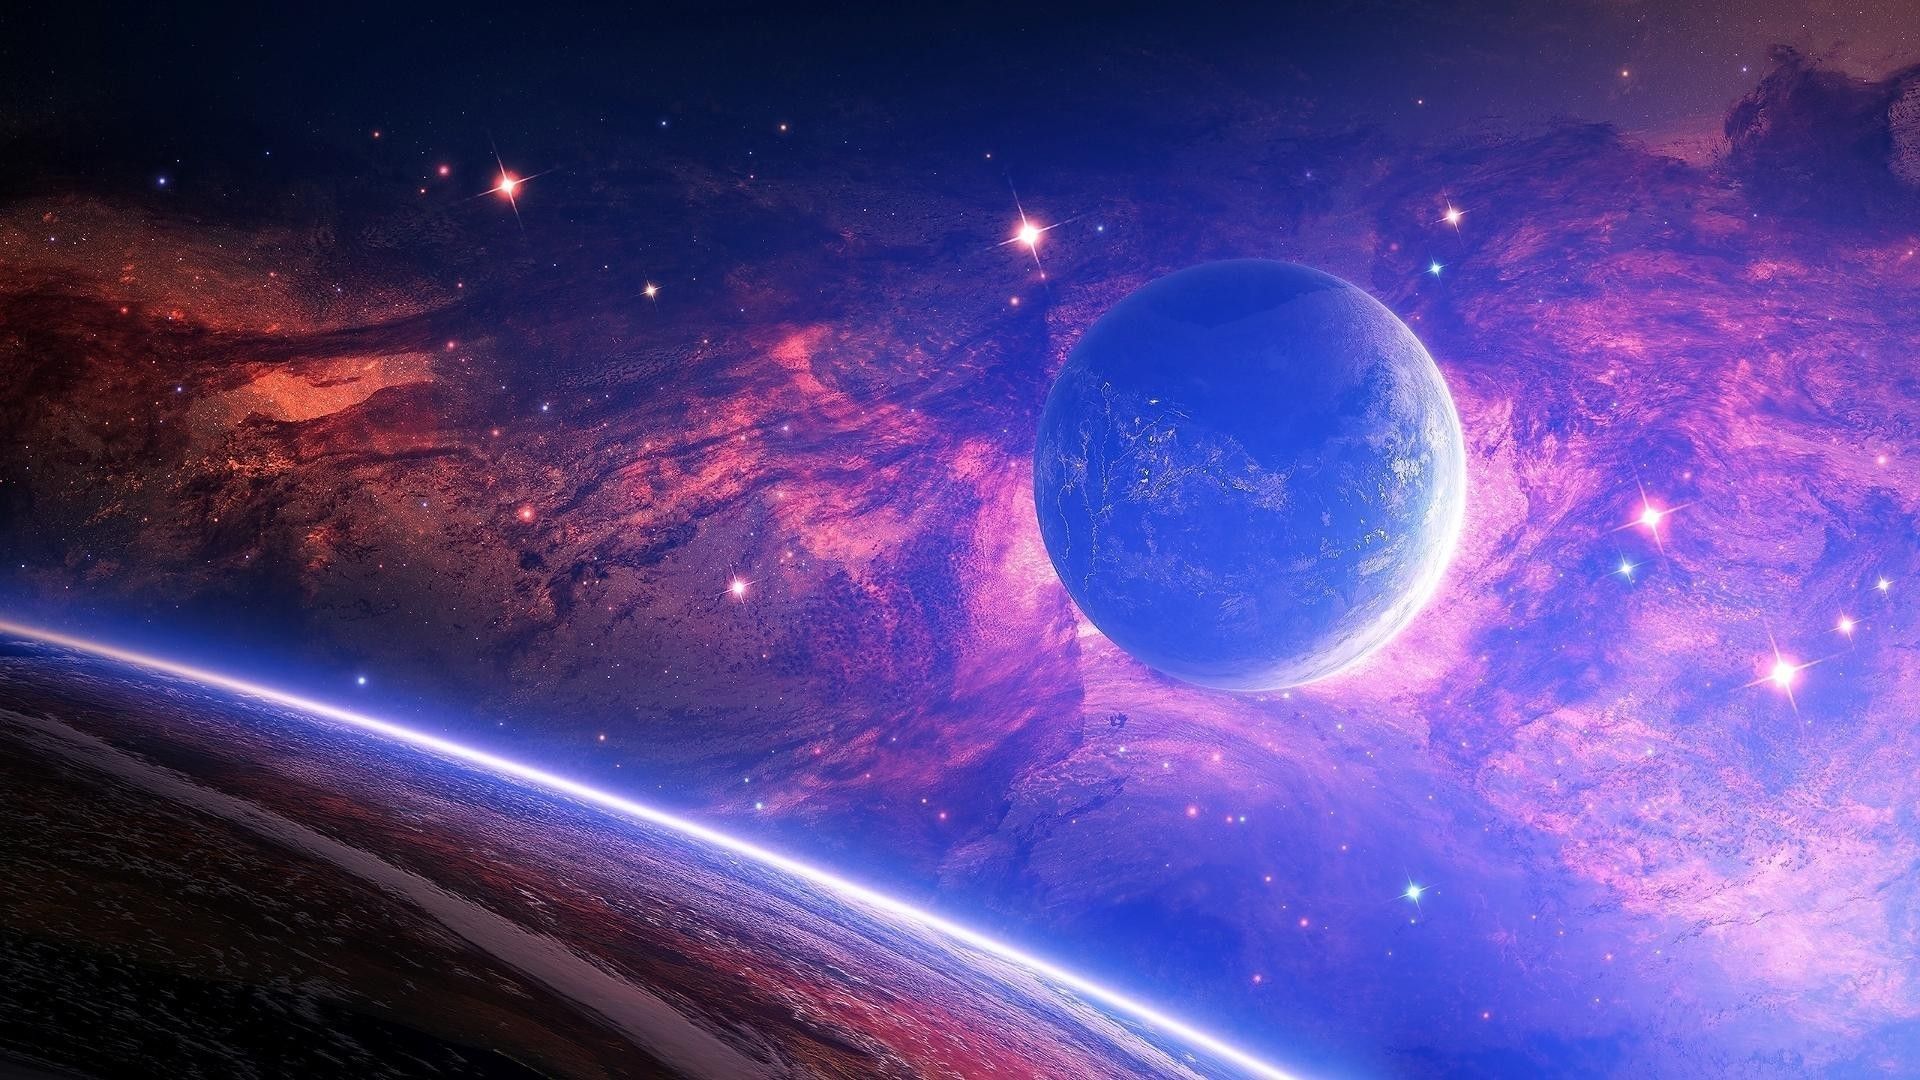 Space wallpapers for mobile - Galaxy, space, planet